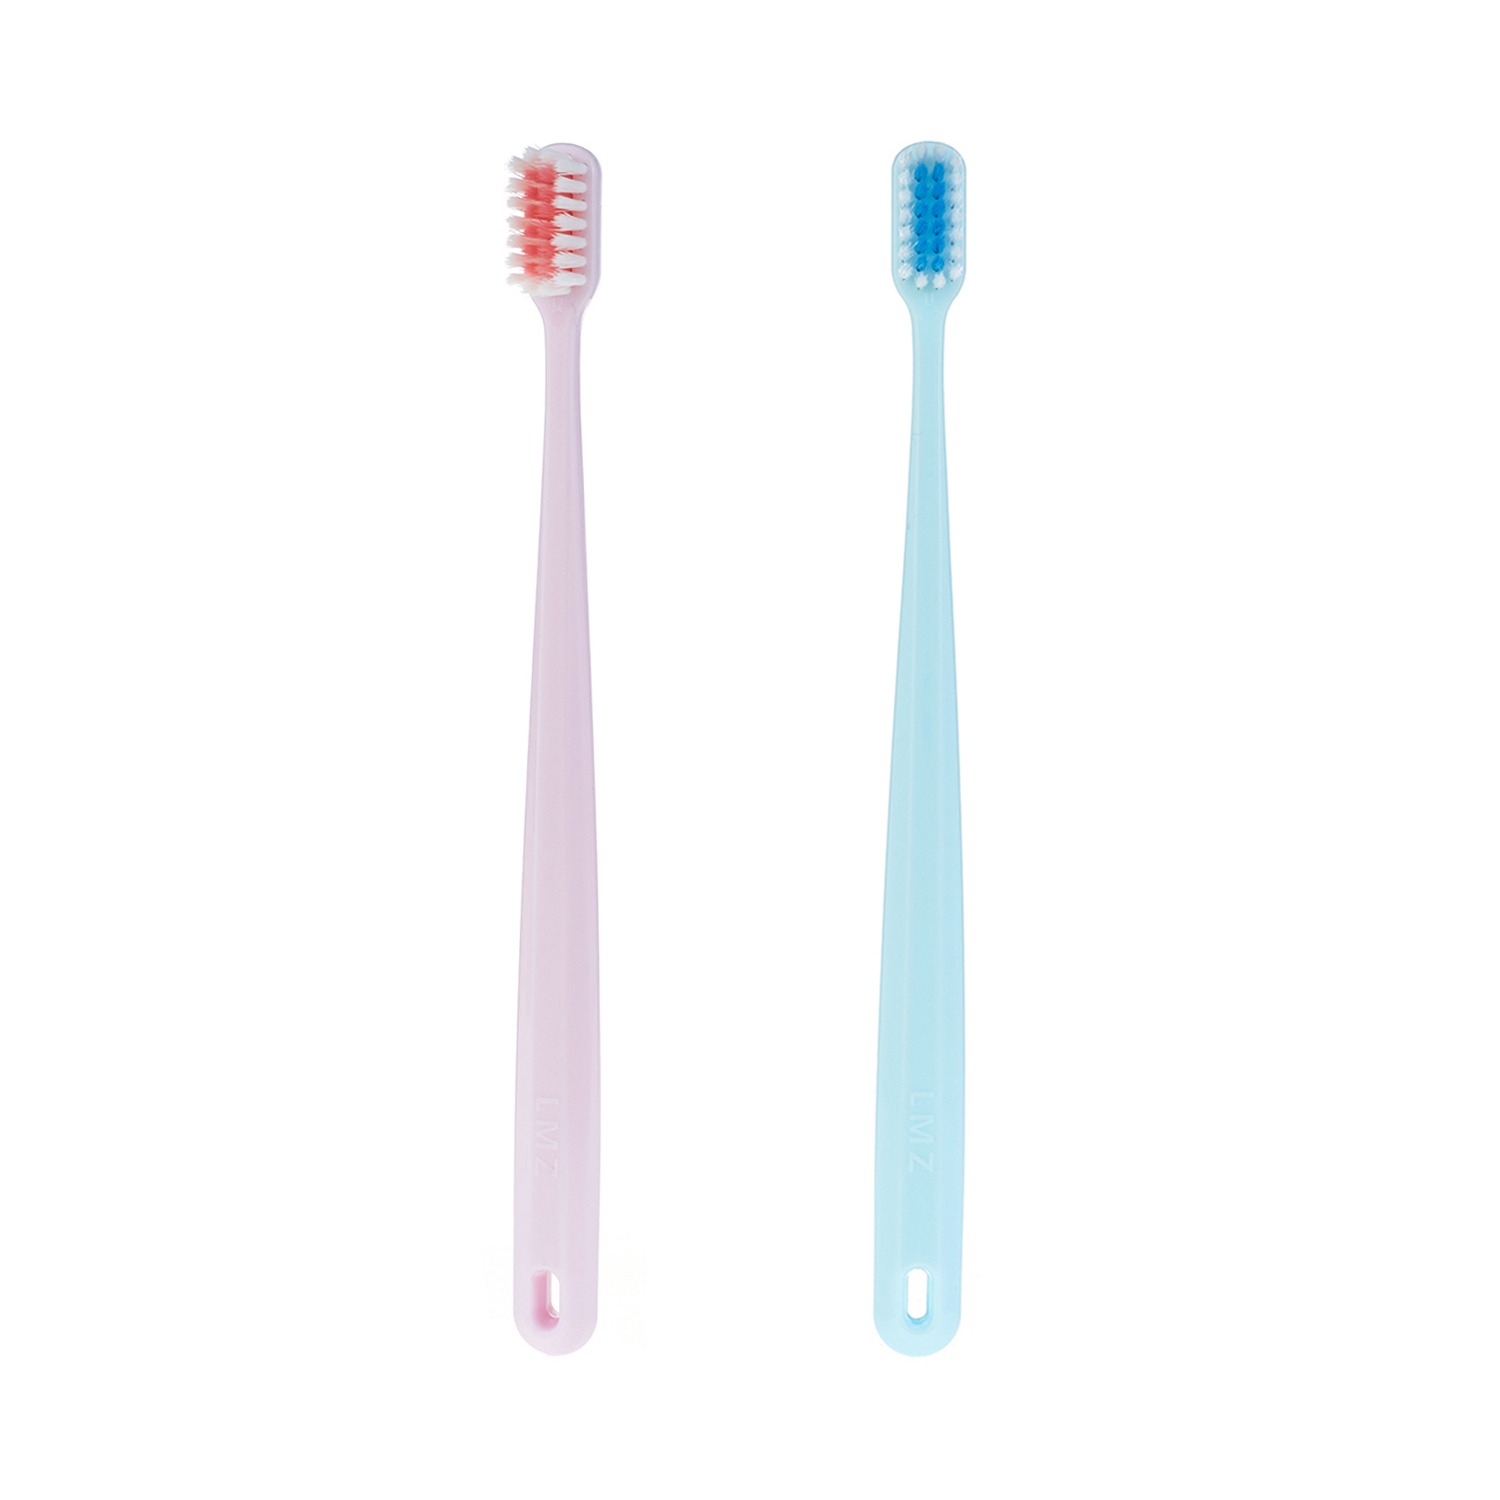 Adult toothbrush L808